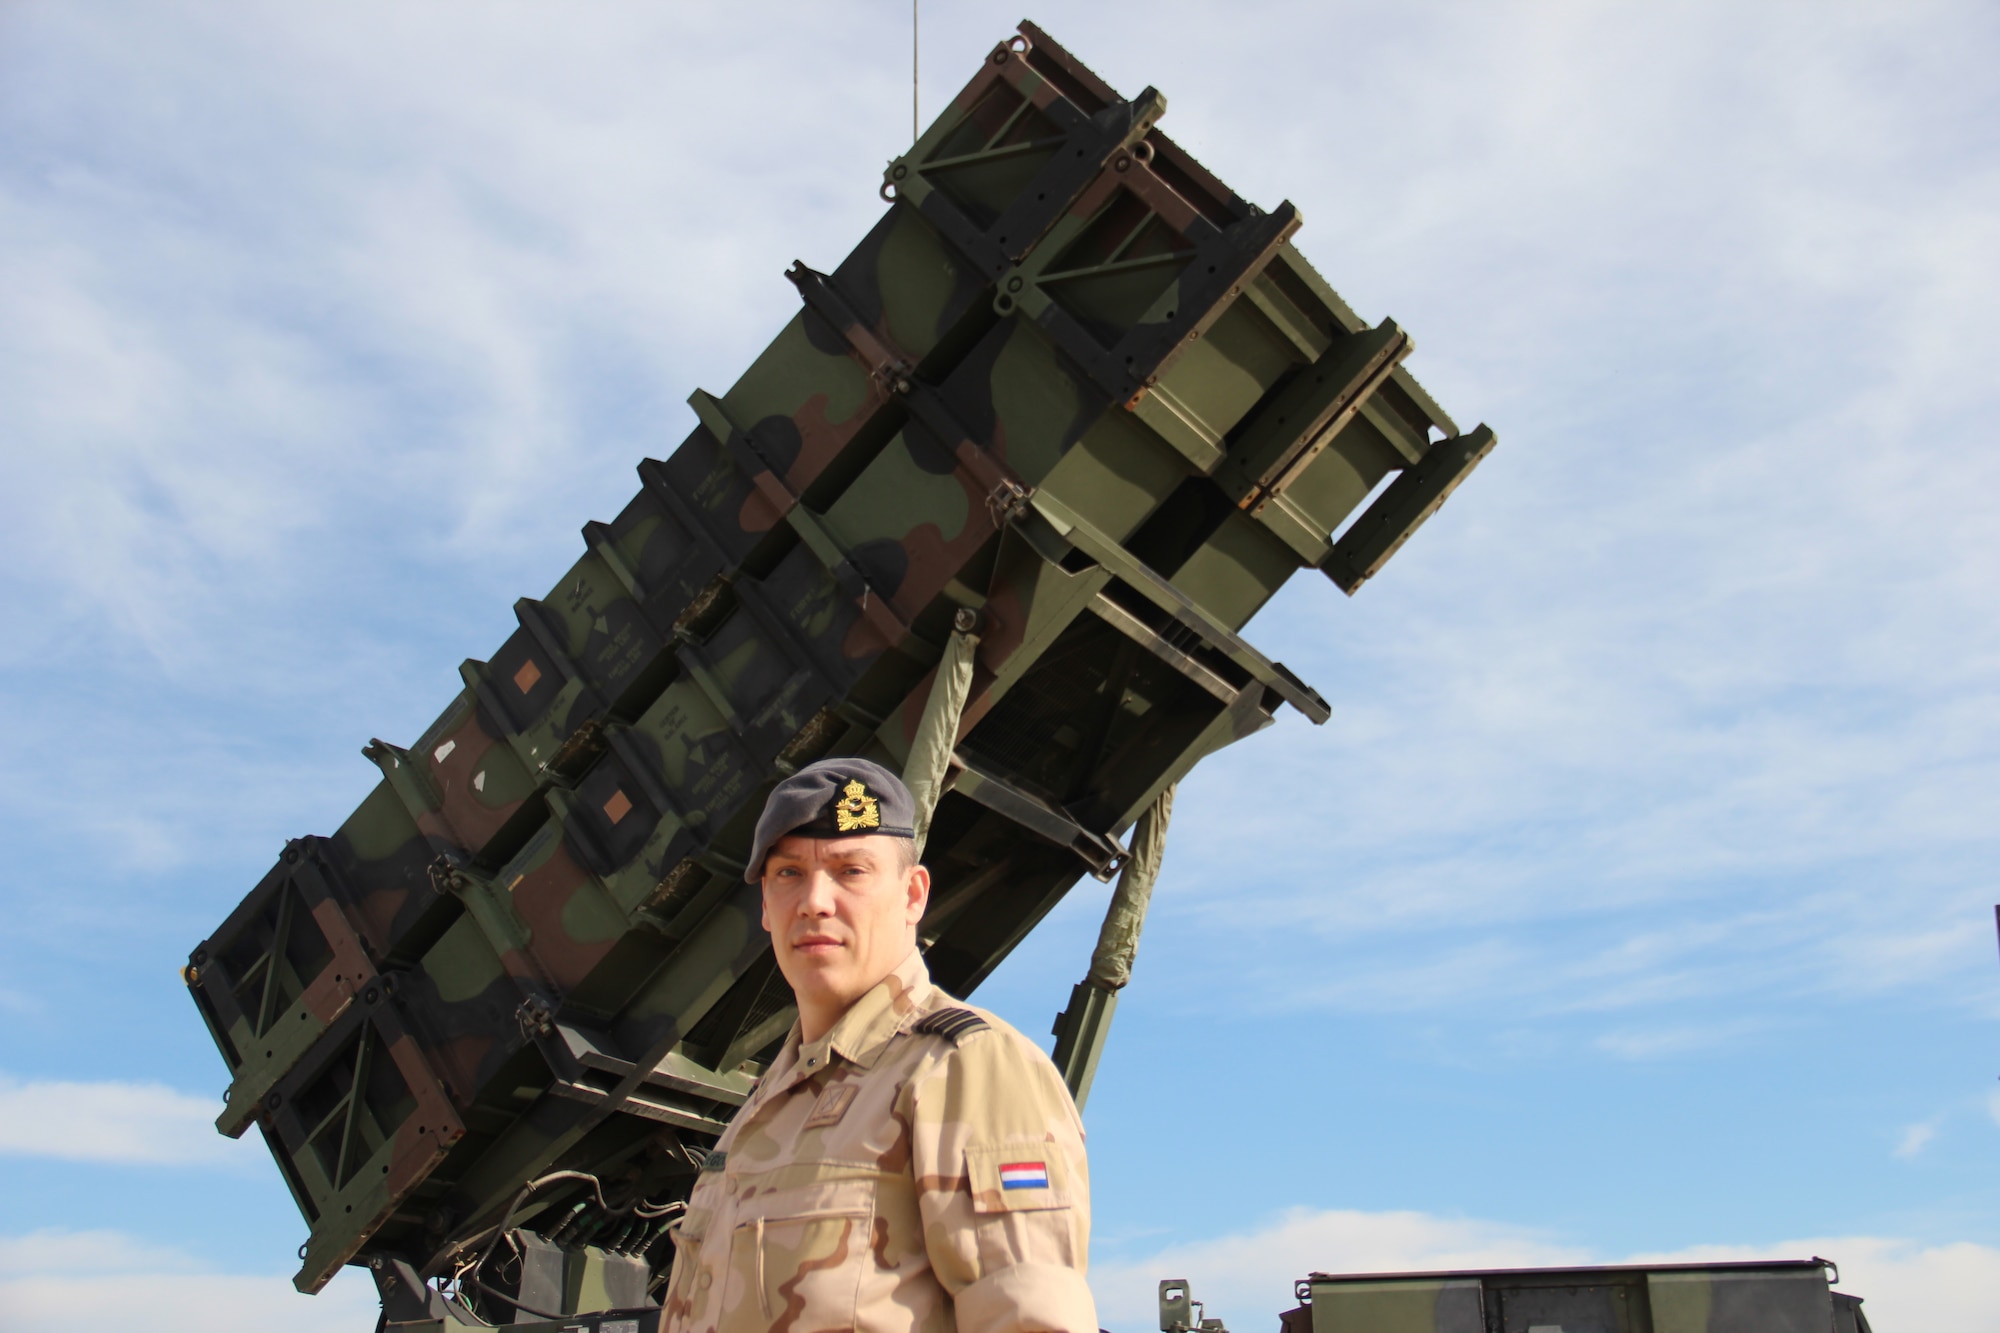 Col. Niels Vredegoor, 1st Netherlands Ballistic Missile Defense Task Force commander, stands in front of a Patriot missile Dec. 17, 2014, at Incirlik Air Base, Turkey. The Dutch forces spent two years providing air defense for Incirlik and the surrounding cities. (Courtesy Photo)